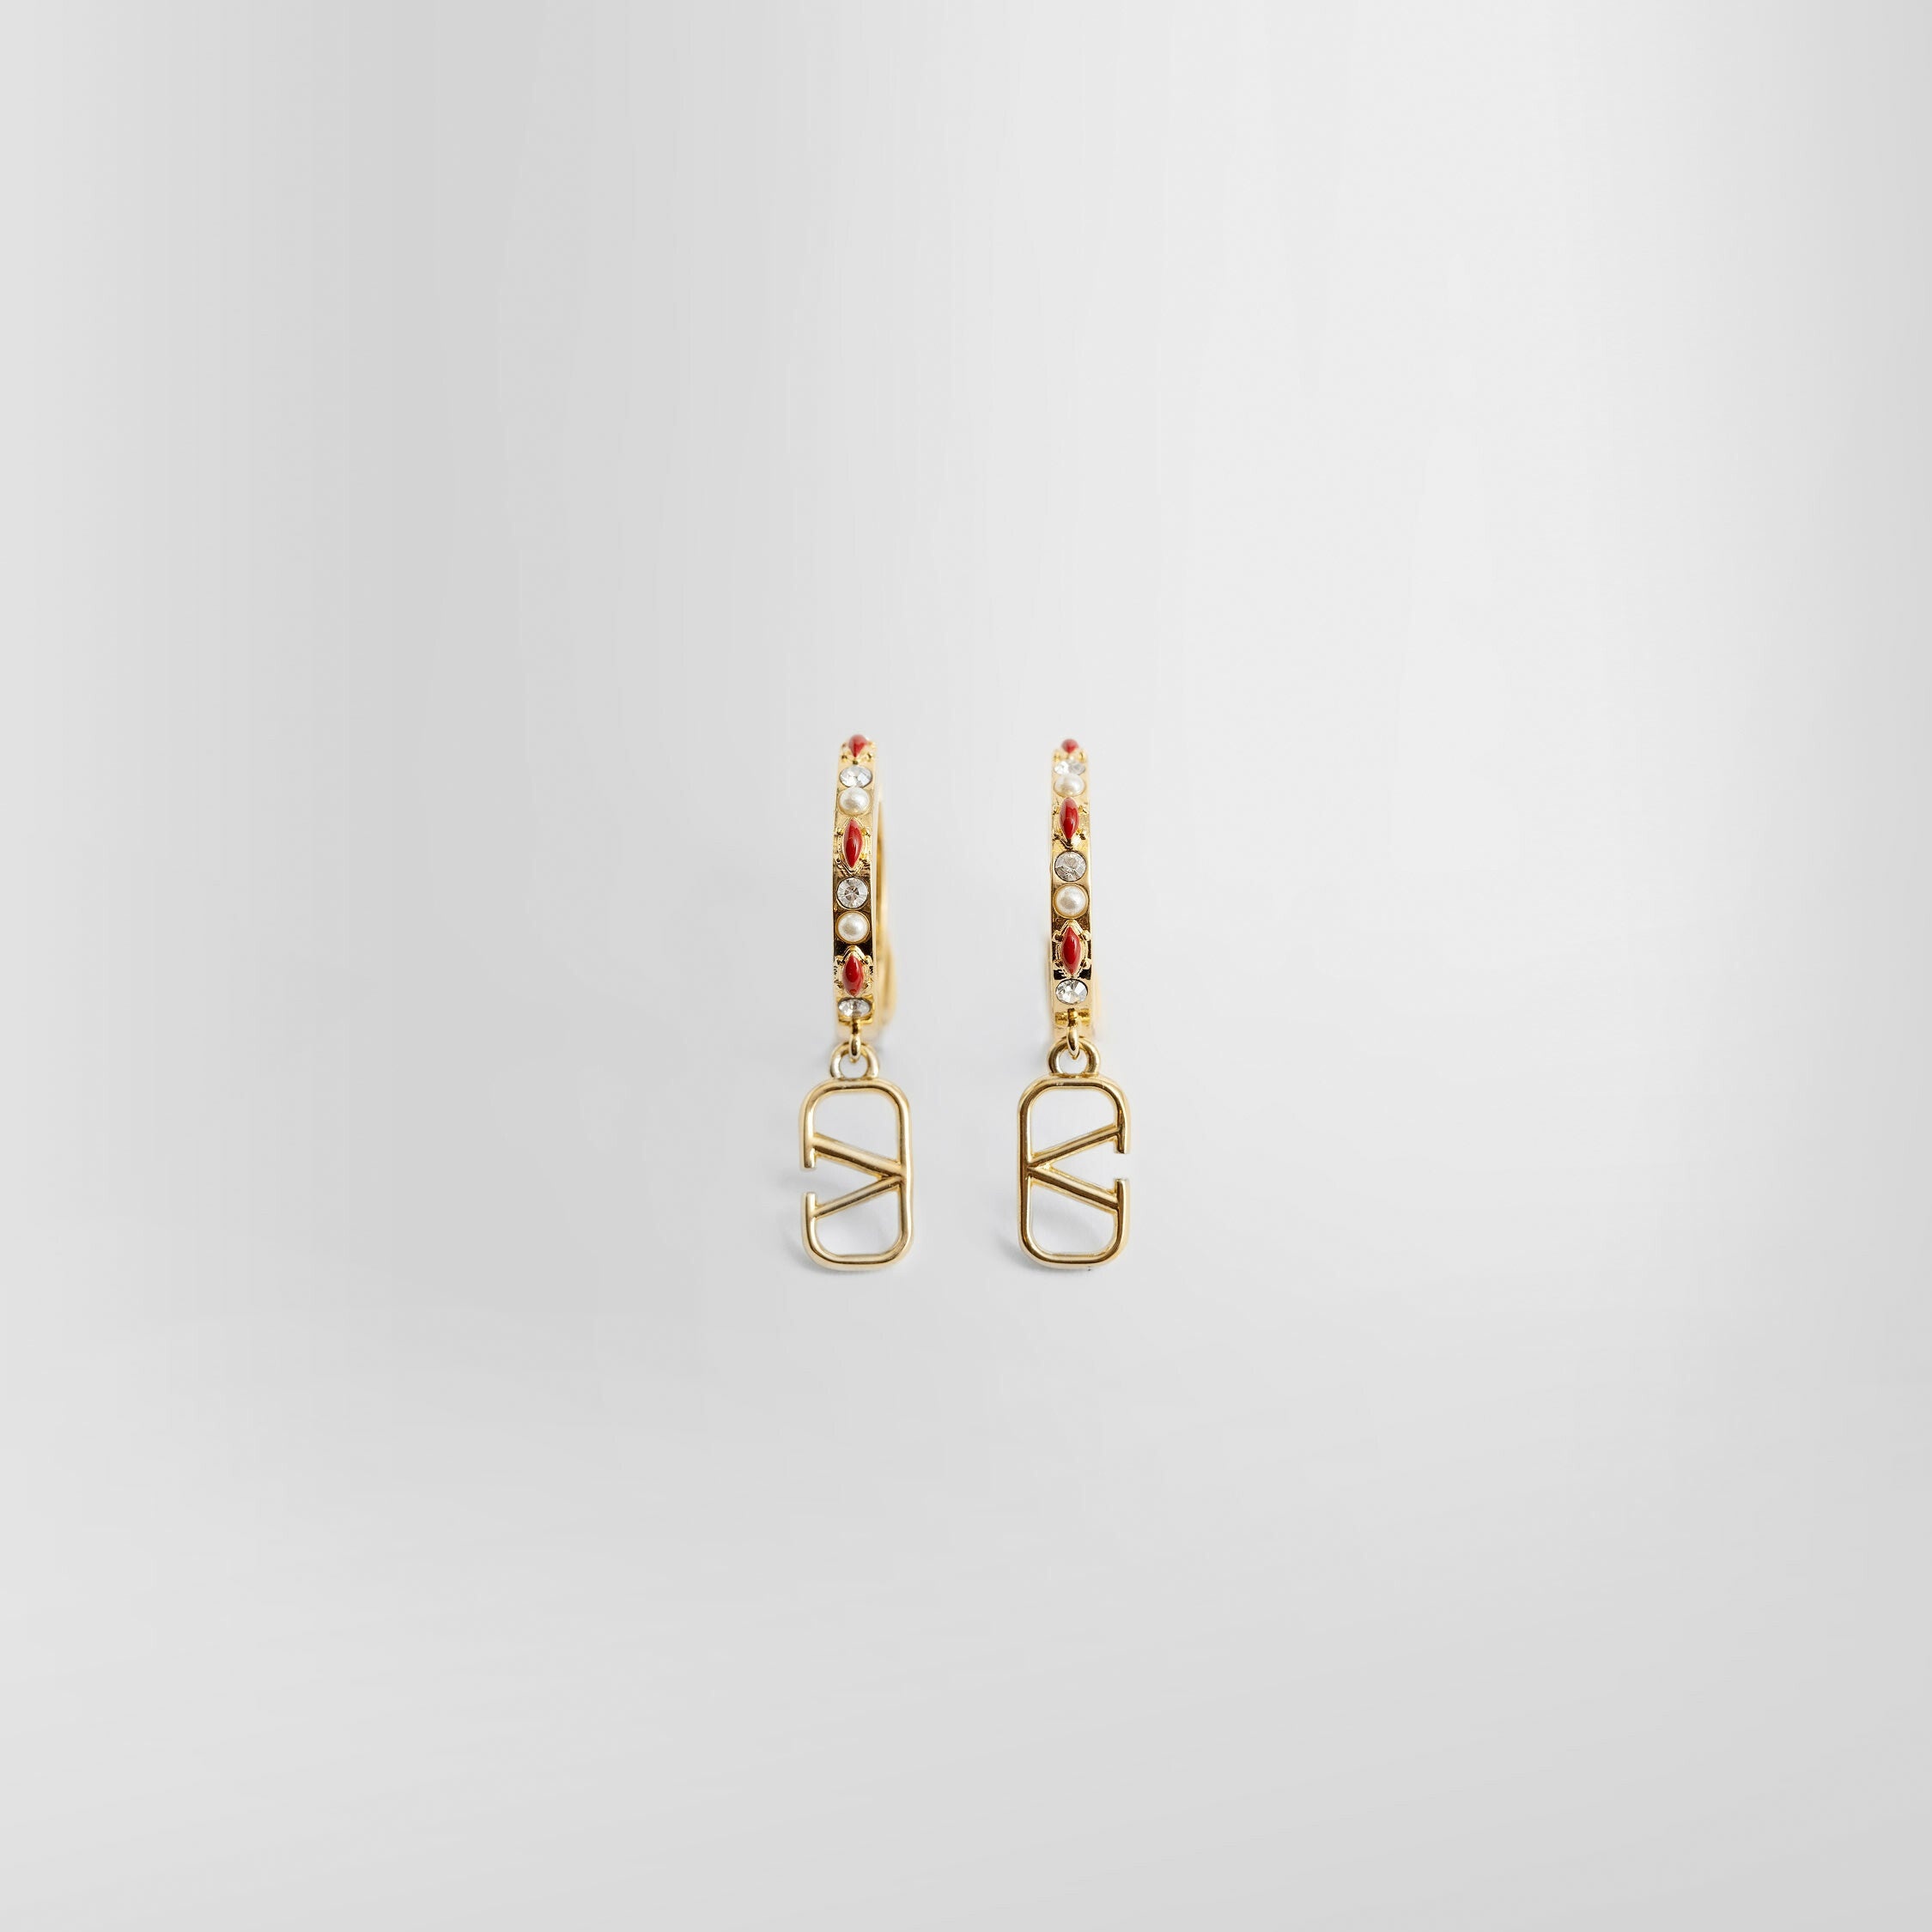 VALENTINO WOMAN GOLD EARRINGS - 4